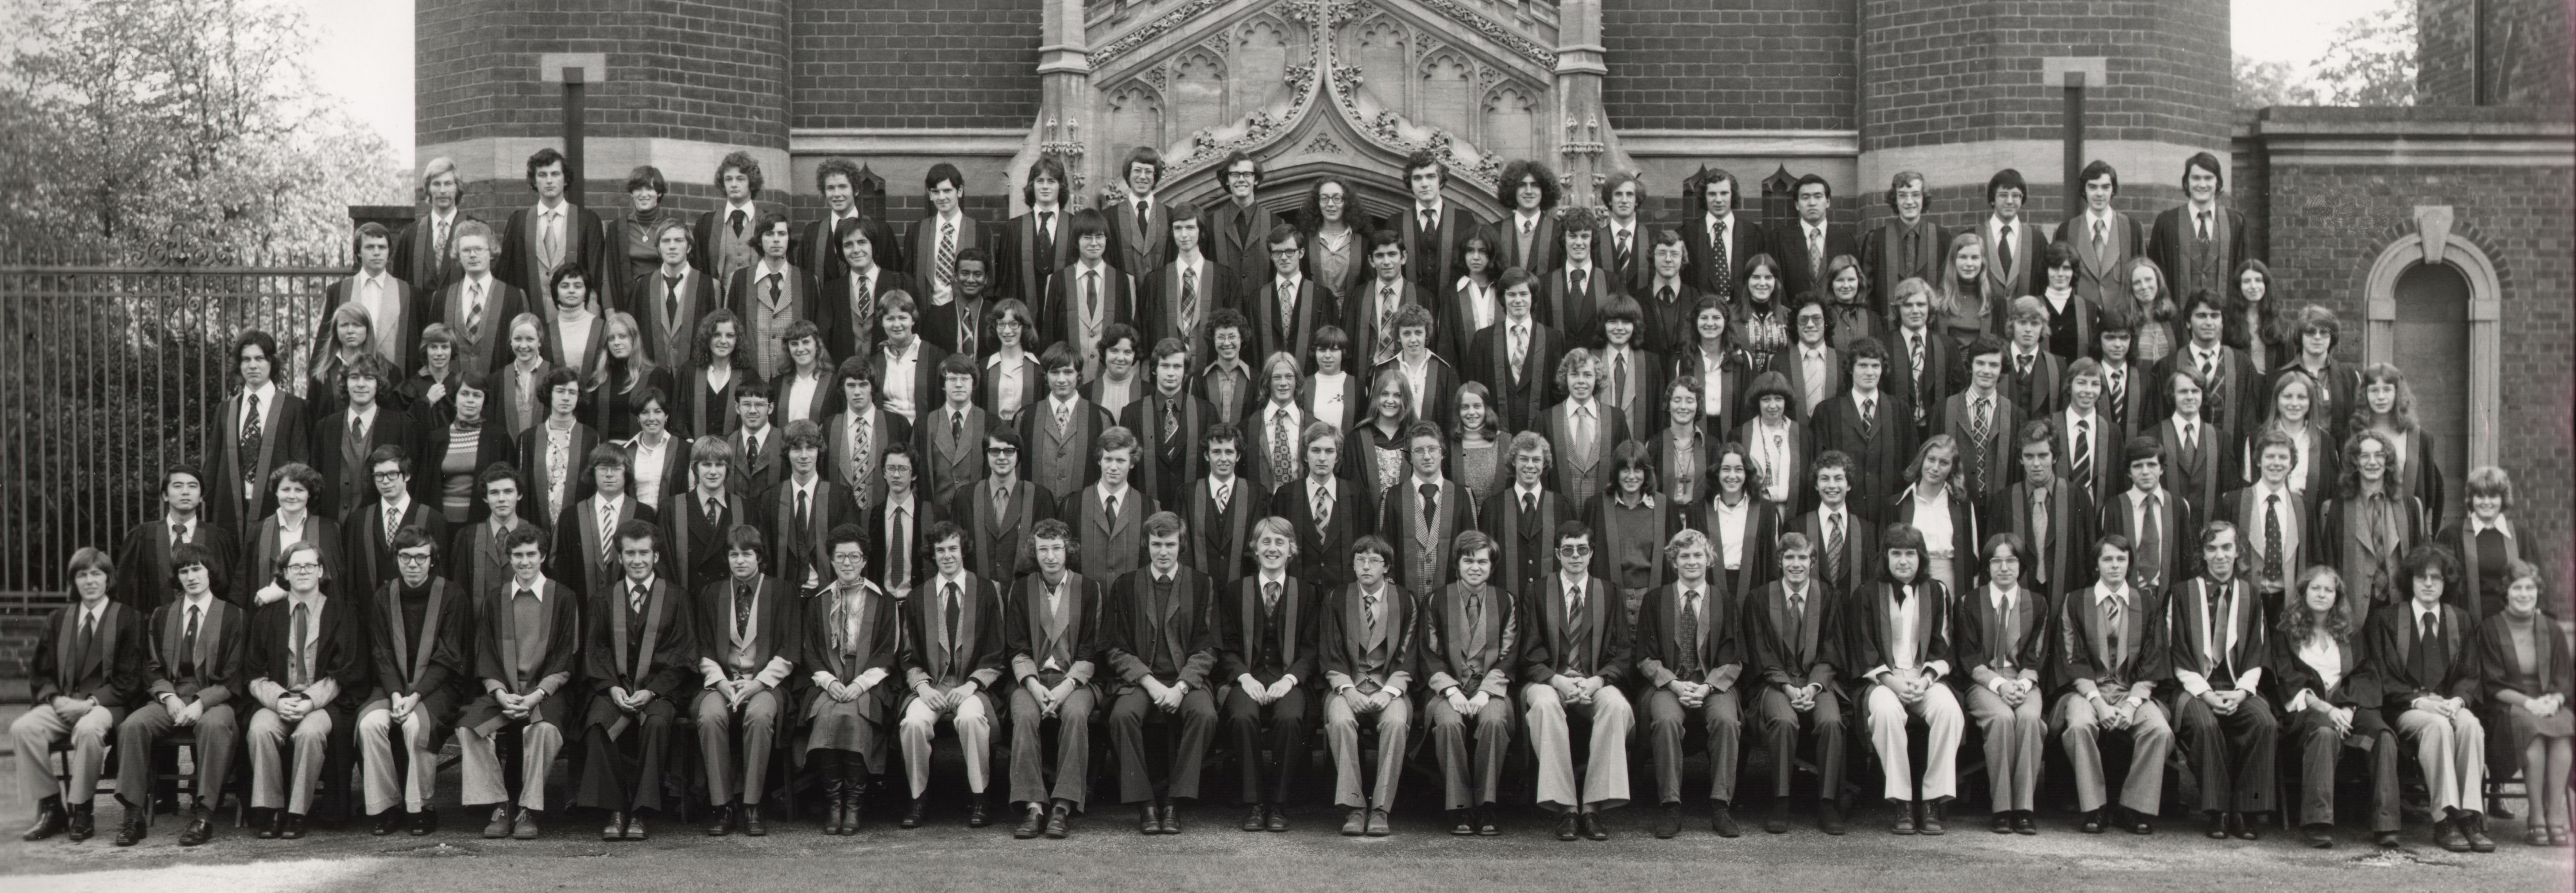 A matriculation photo from 1976, the first year that women were part of the intake.